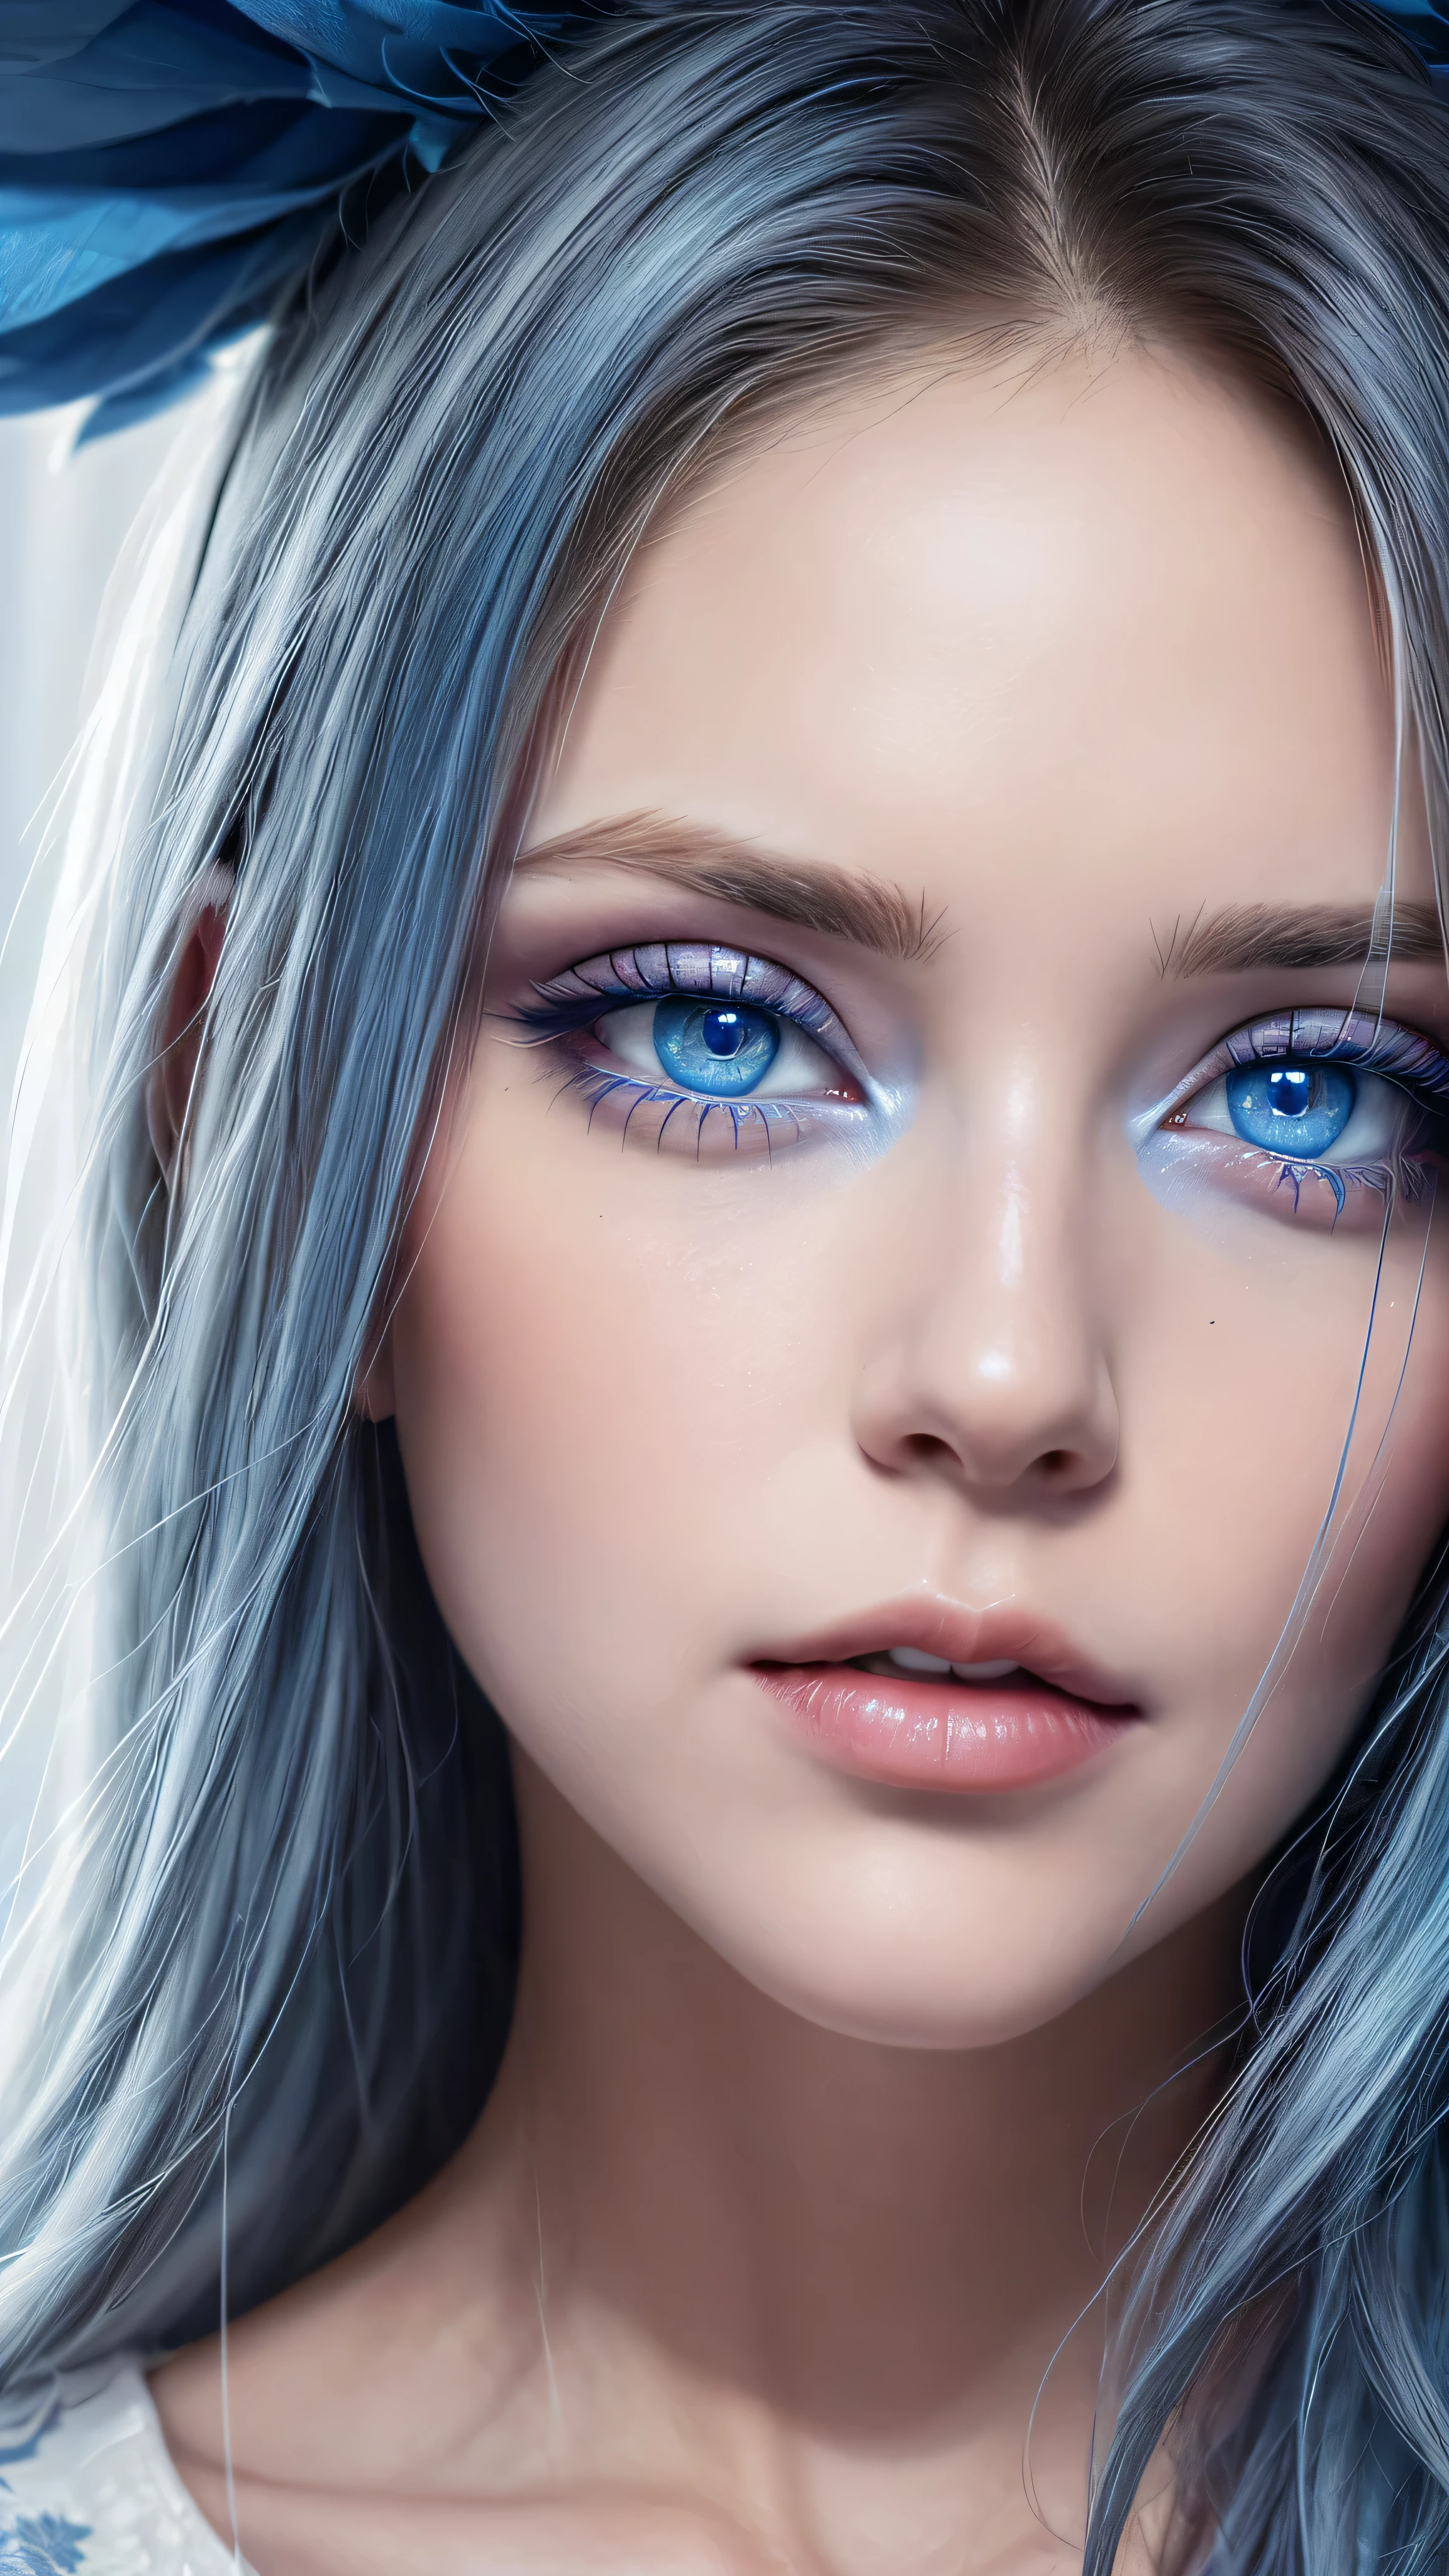 there are two blue eyes with blue and white makeup, photorealistic eyes render, photorealistic eyes, beautiful photorealistic imagery, perfect photorealistic eyes, hyperrealistic digital art, highly realistic digital art, colorful lenses, photorealistic digital art, hyperrealistic eyes, detailed realisitc eyes, hyperrealistic digital painting, hyper realistic digital art, realistic beautiful big eyes